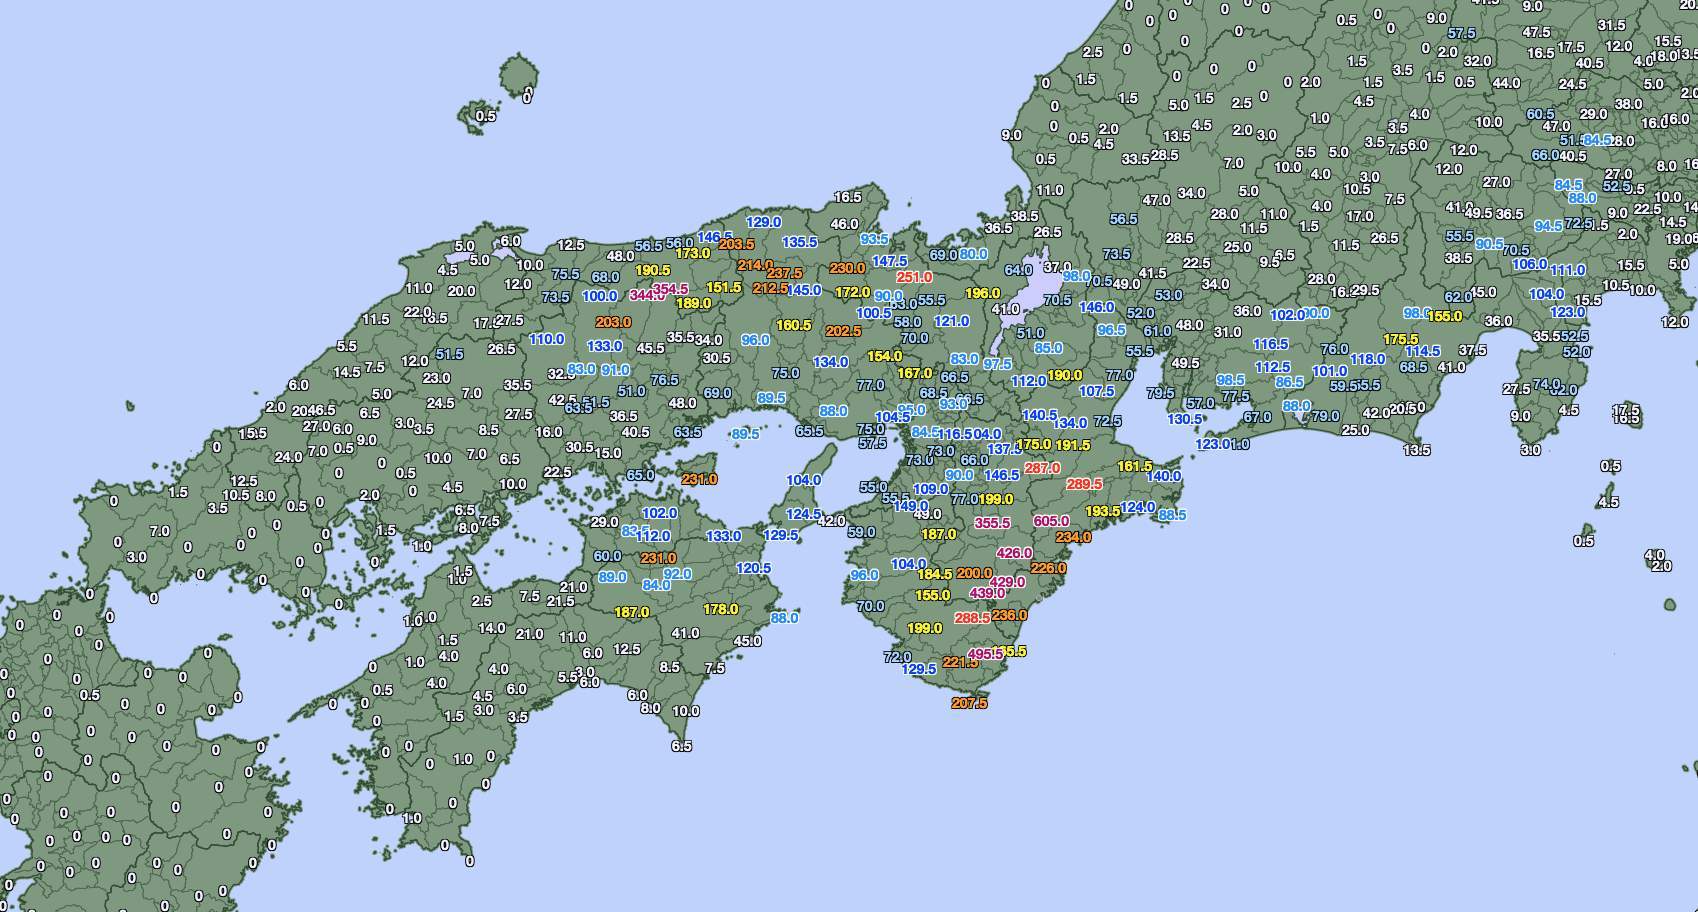 Precipitation in l/m2 over the last 24 hours; Source: Japan Meteorological Agency